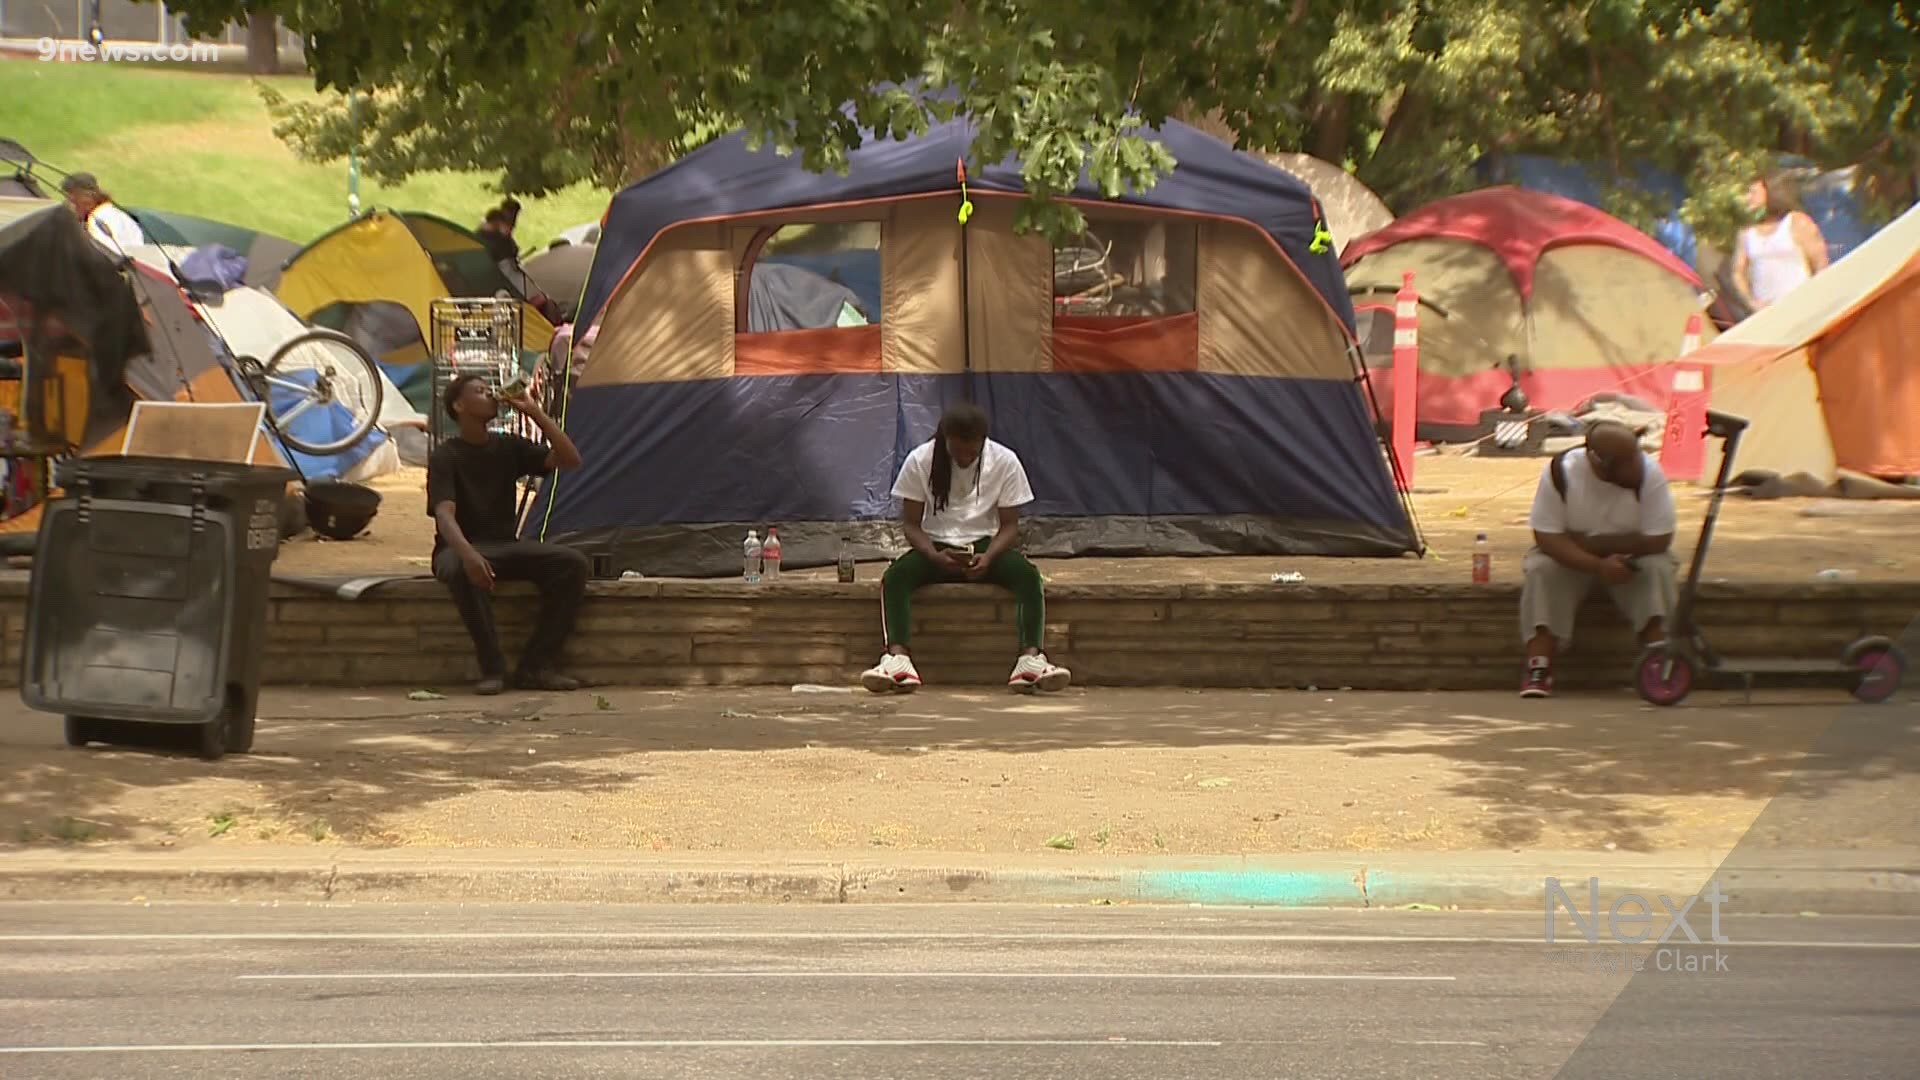 Days after Mayor Michael Hancock suggested the city may pursue its first managed camp for the homeless on a piece of property in Five Points, he had to walk it back.